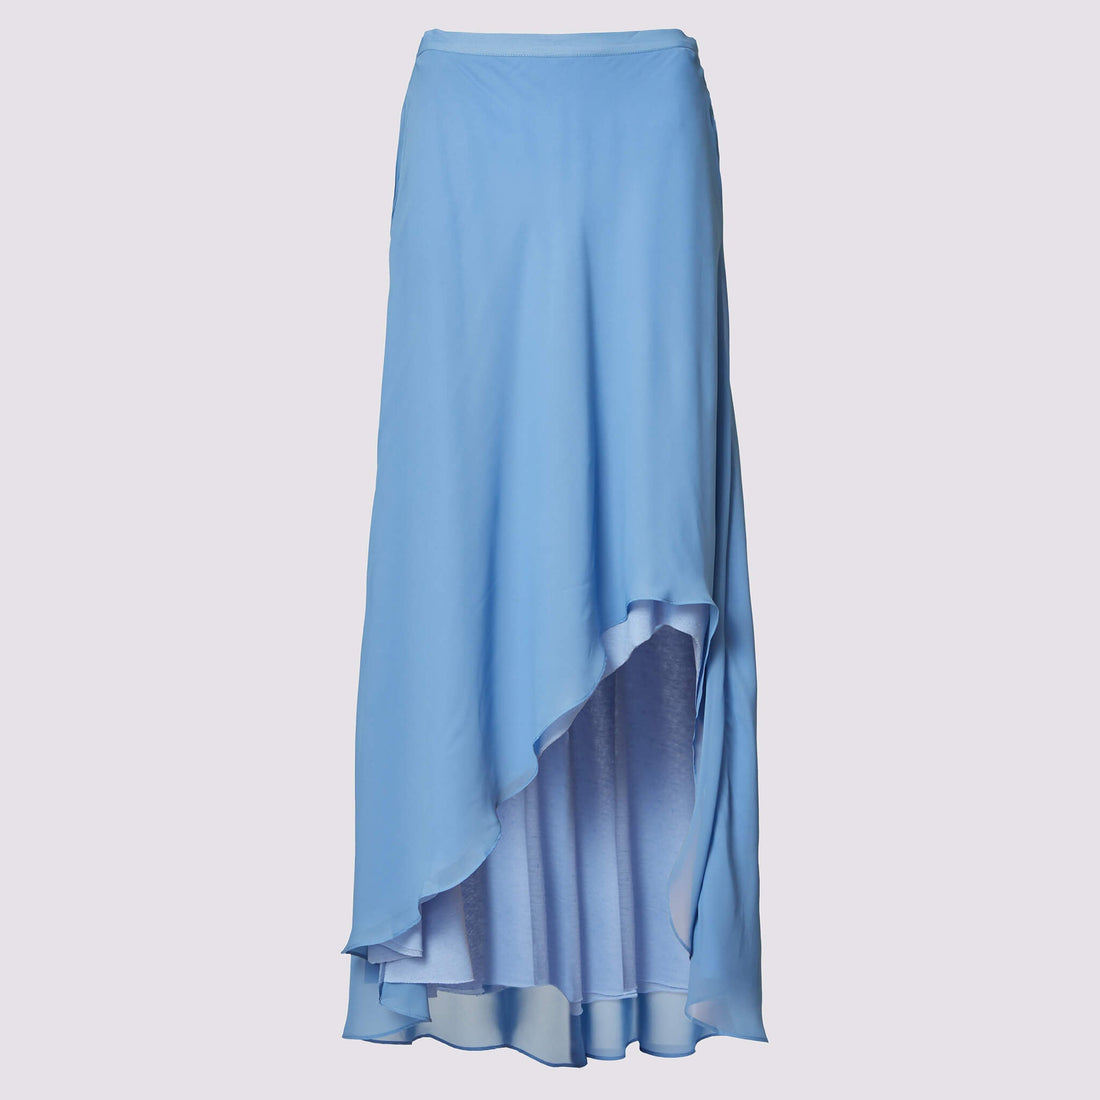  shay skirt front view in blue by inlarkin new arrivals